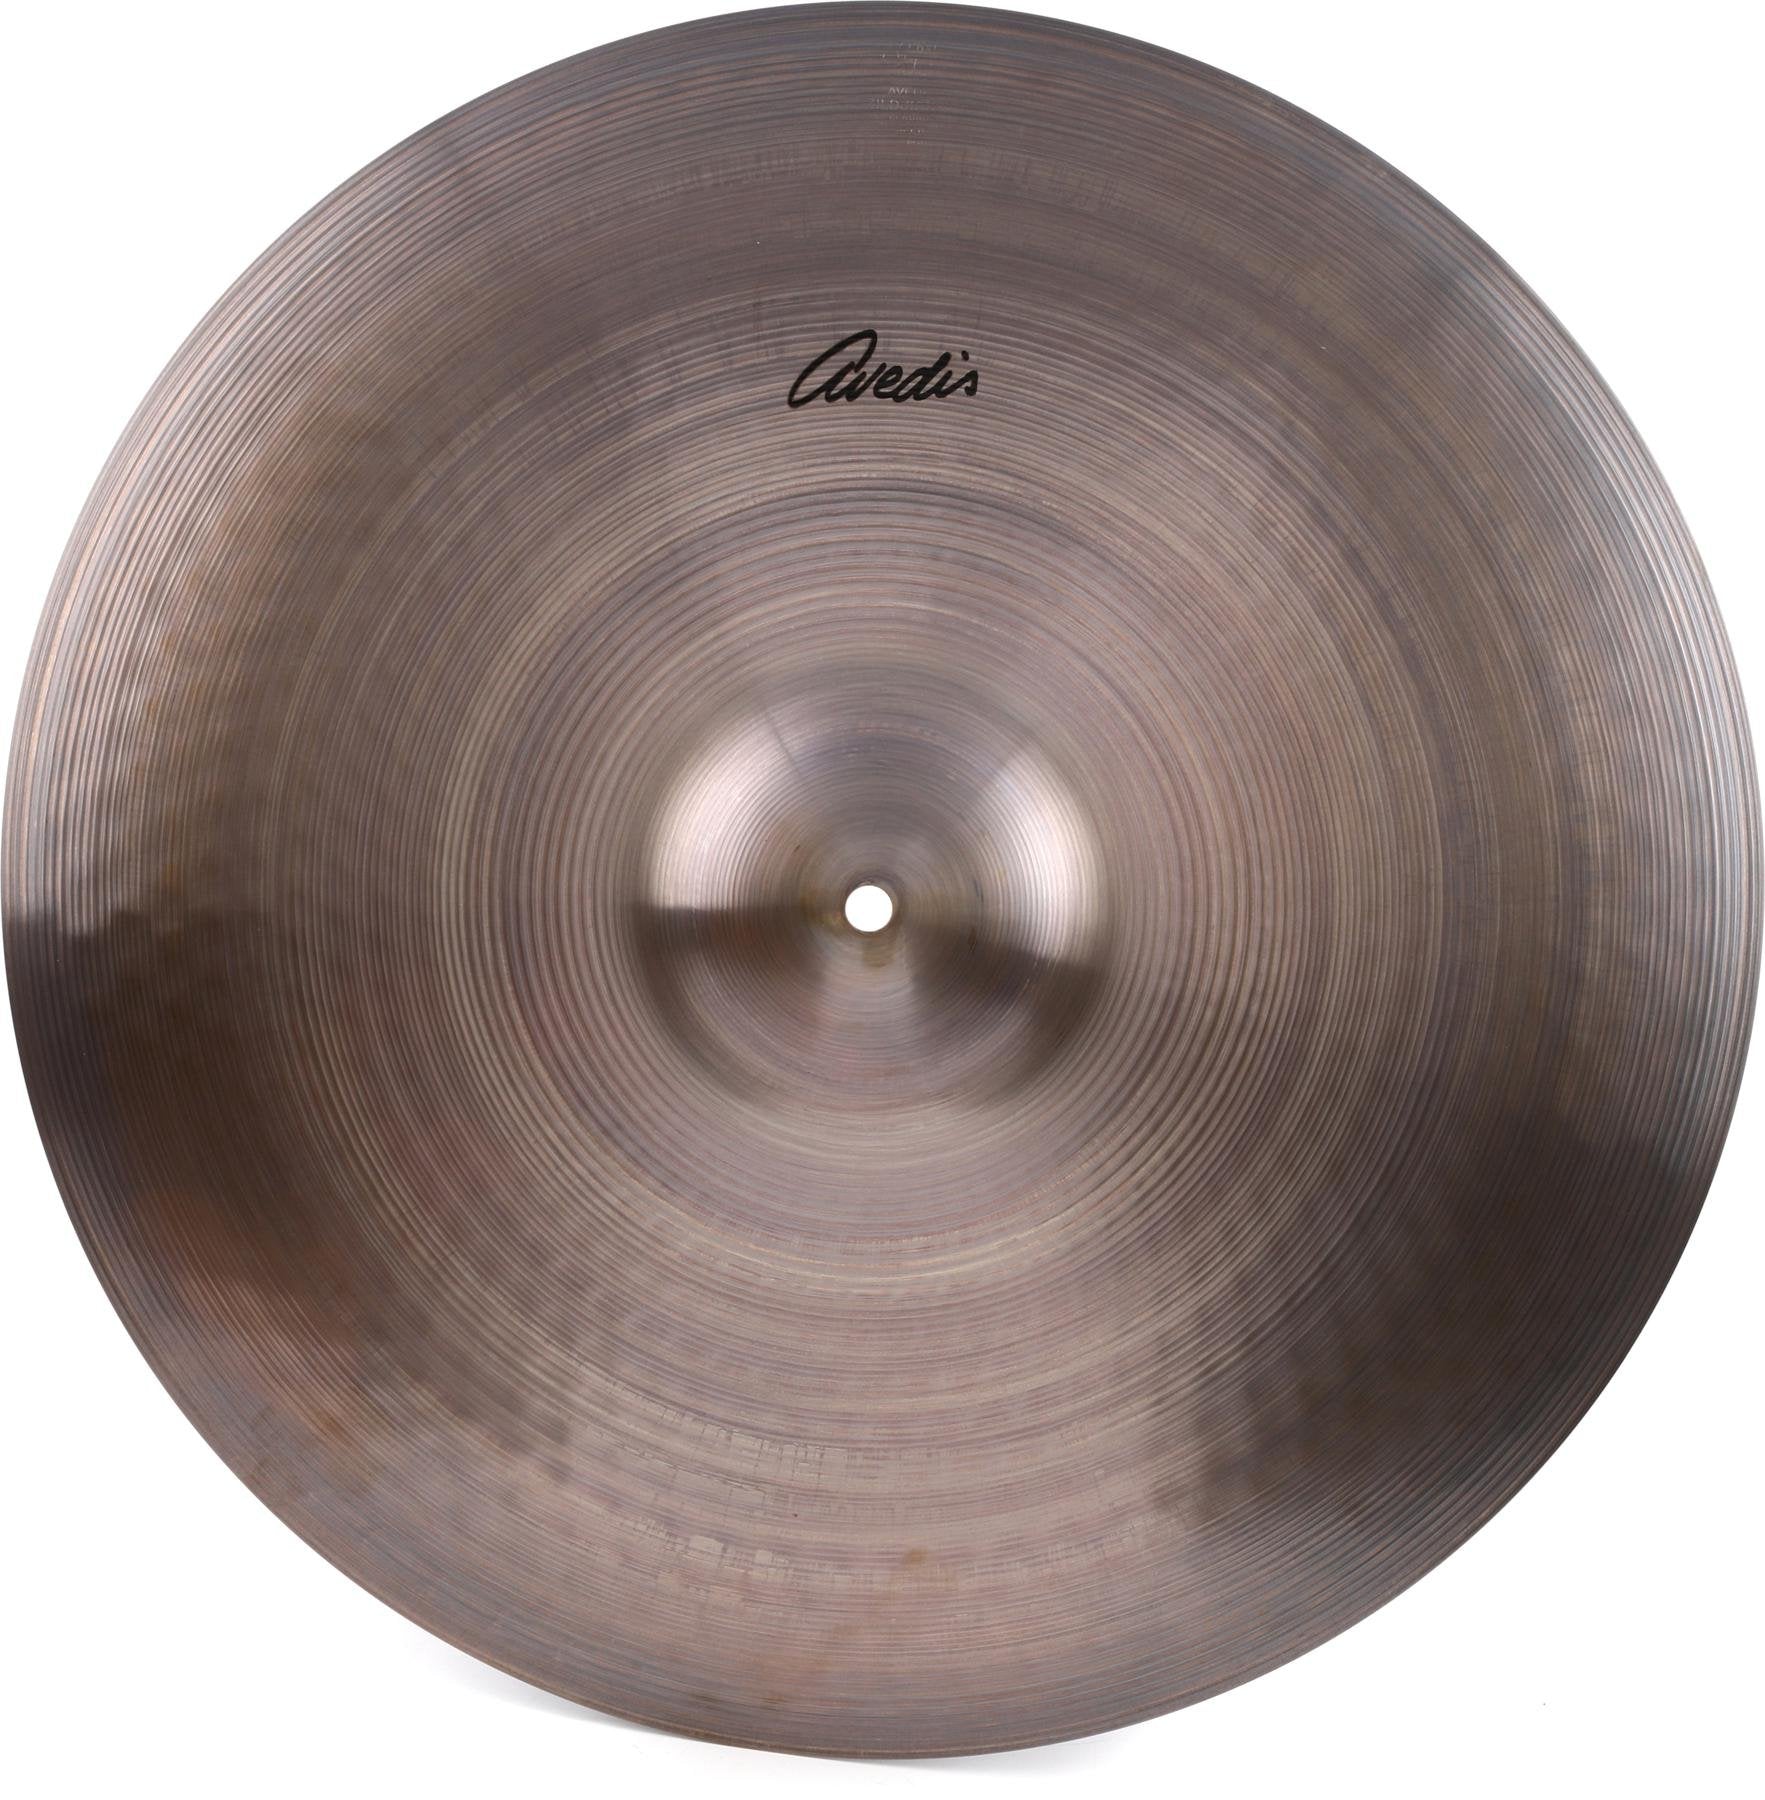 ZILDJIAN A Avedis Ride Cymbal (Available in various sizes)